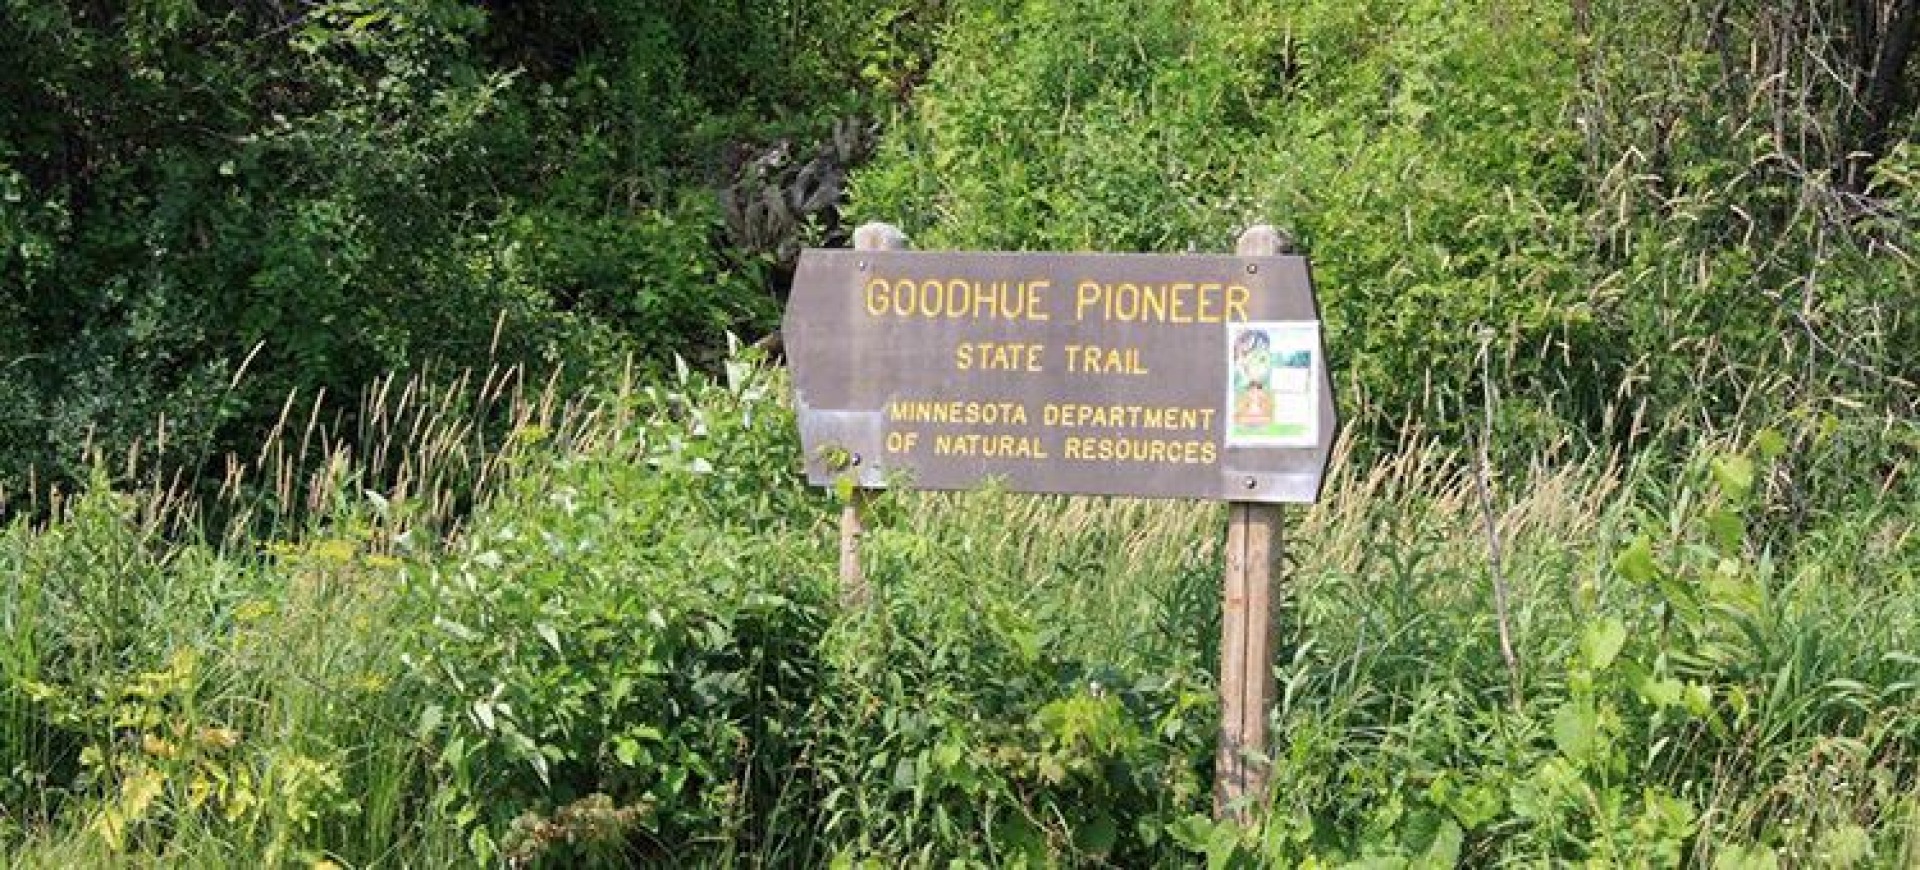 The Goodhue Pioneer State Trail park sign.